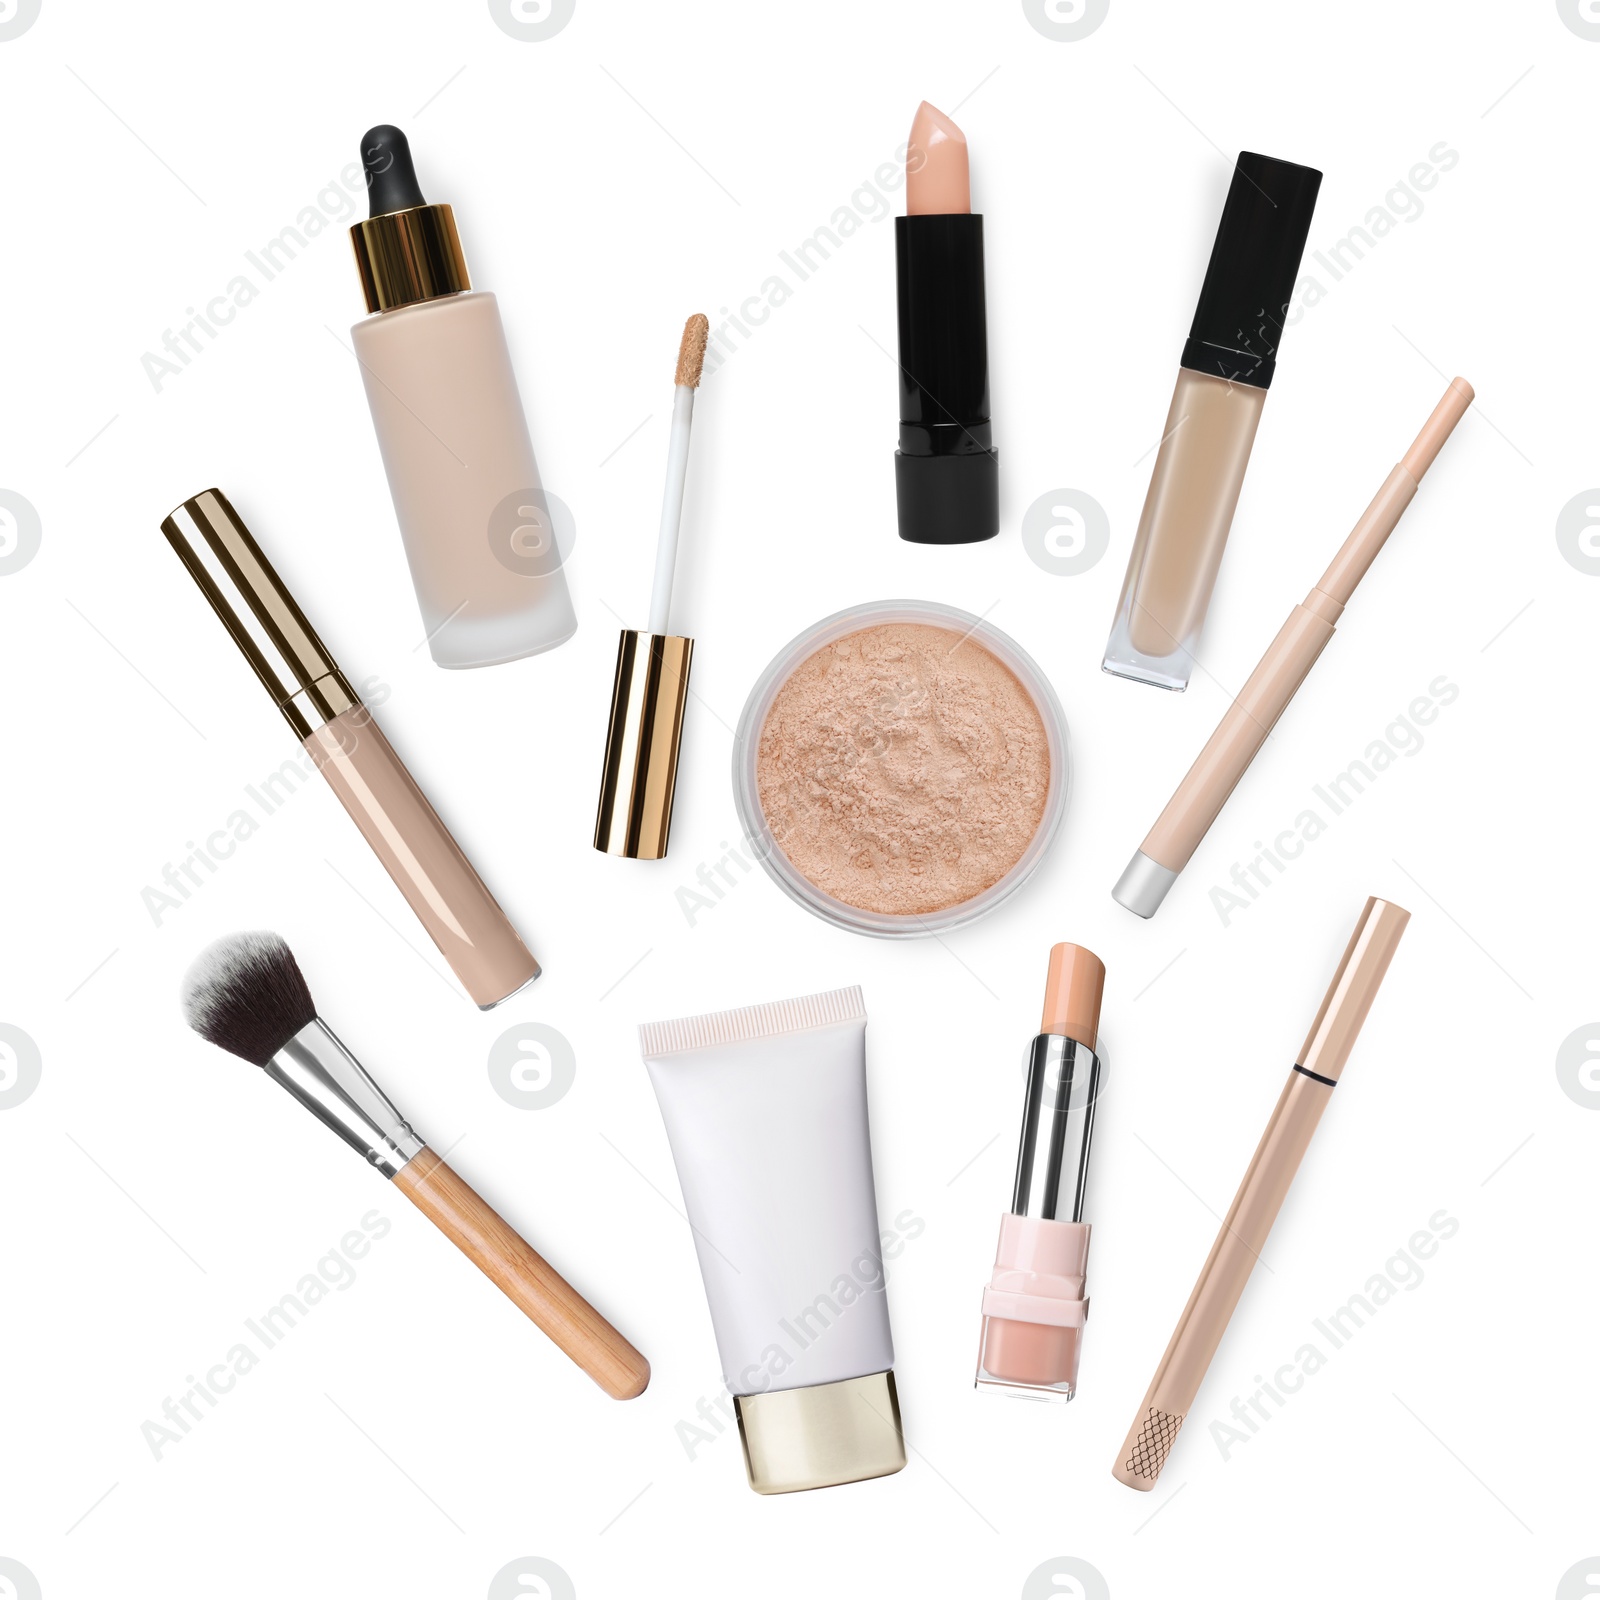 Image of Face powder, concealers, liquid foundations and brush isolated on white. Collection of makeup products